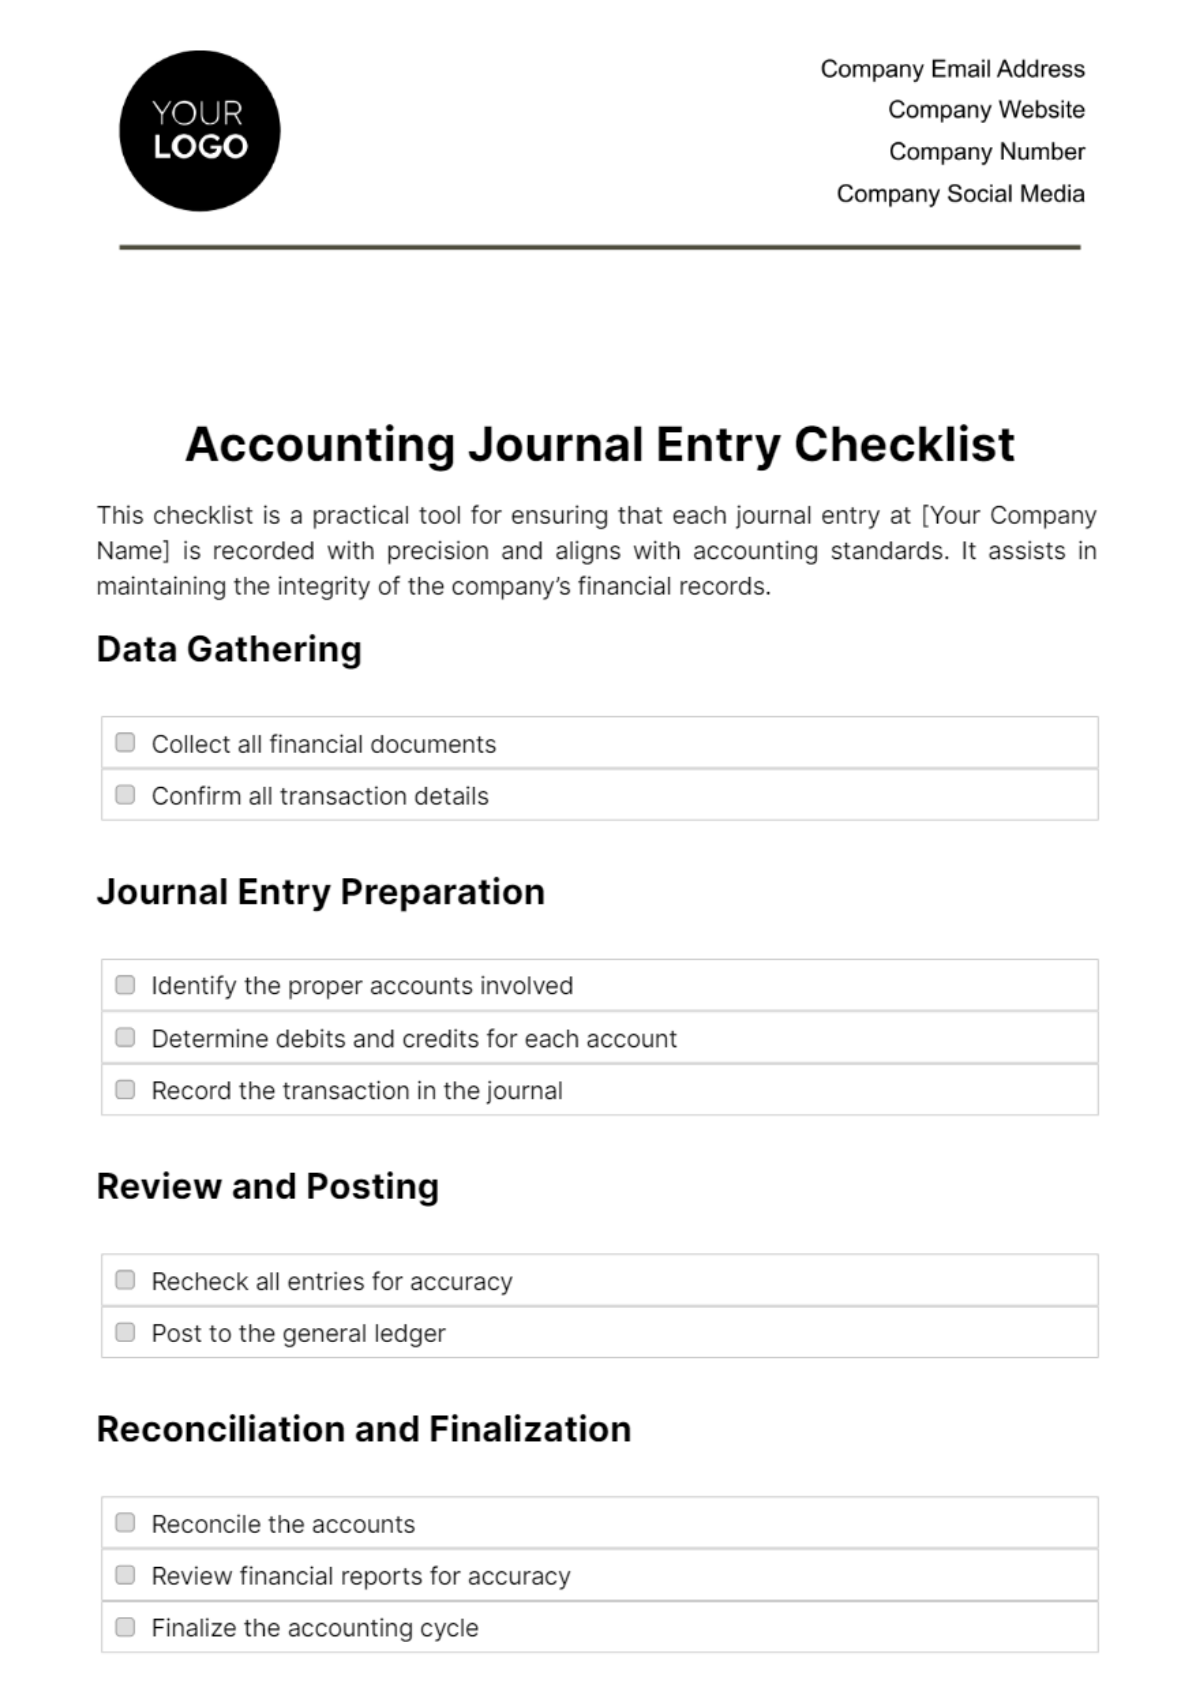 Accounting Journal Entry Checklist Template